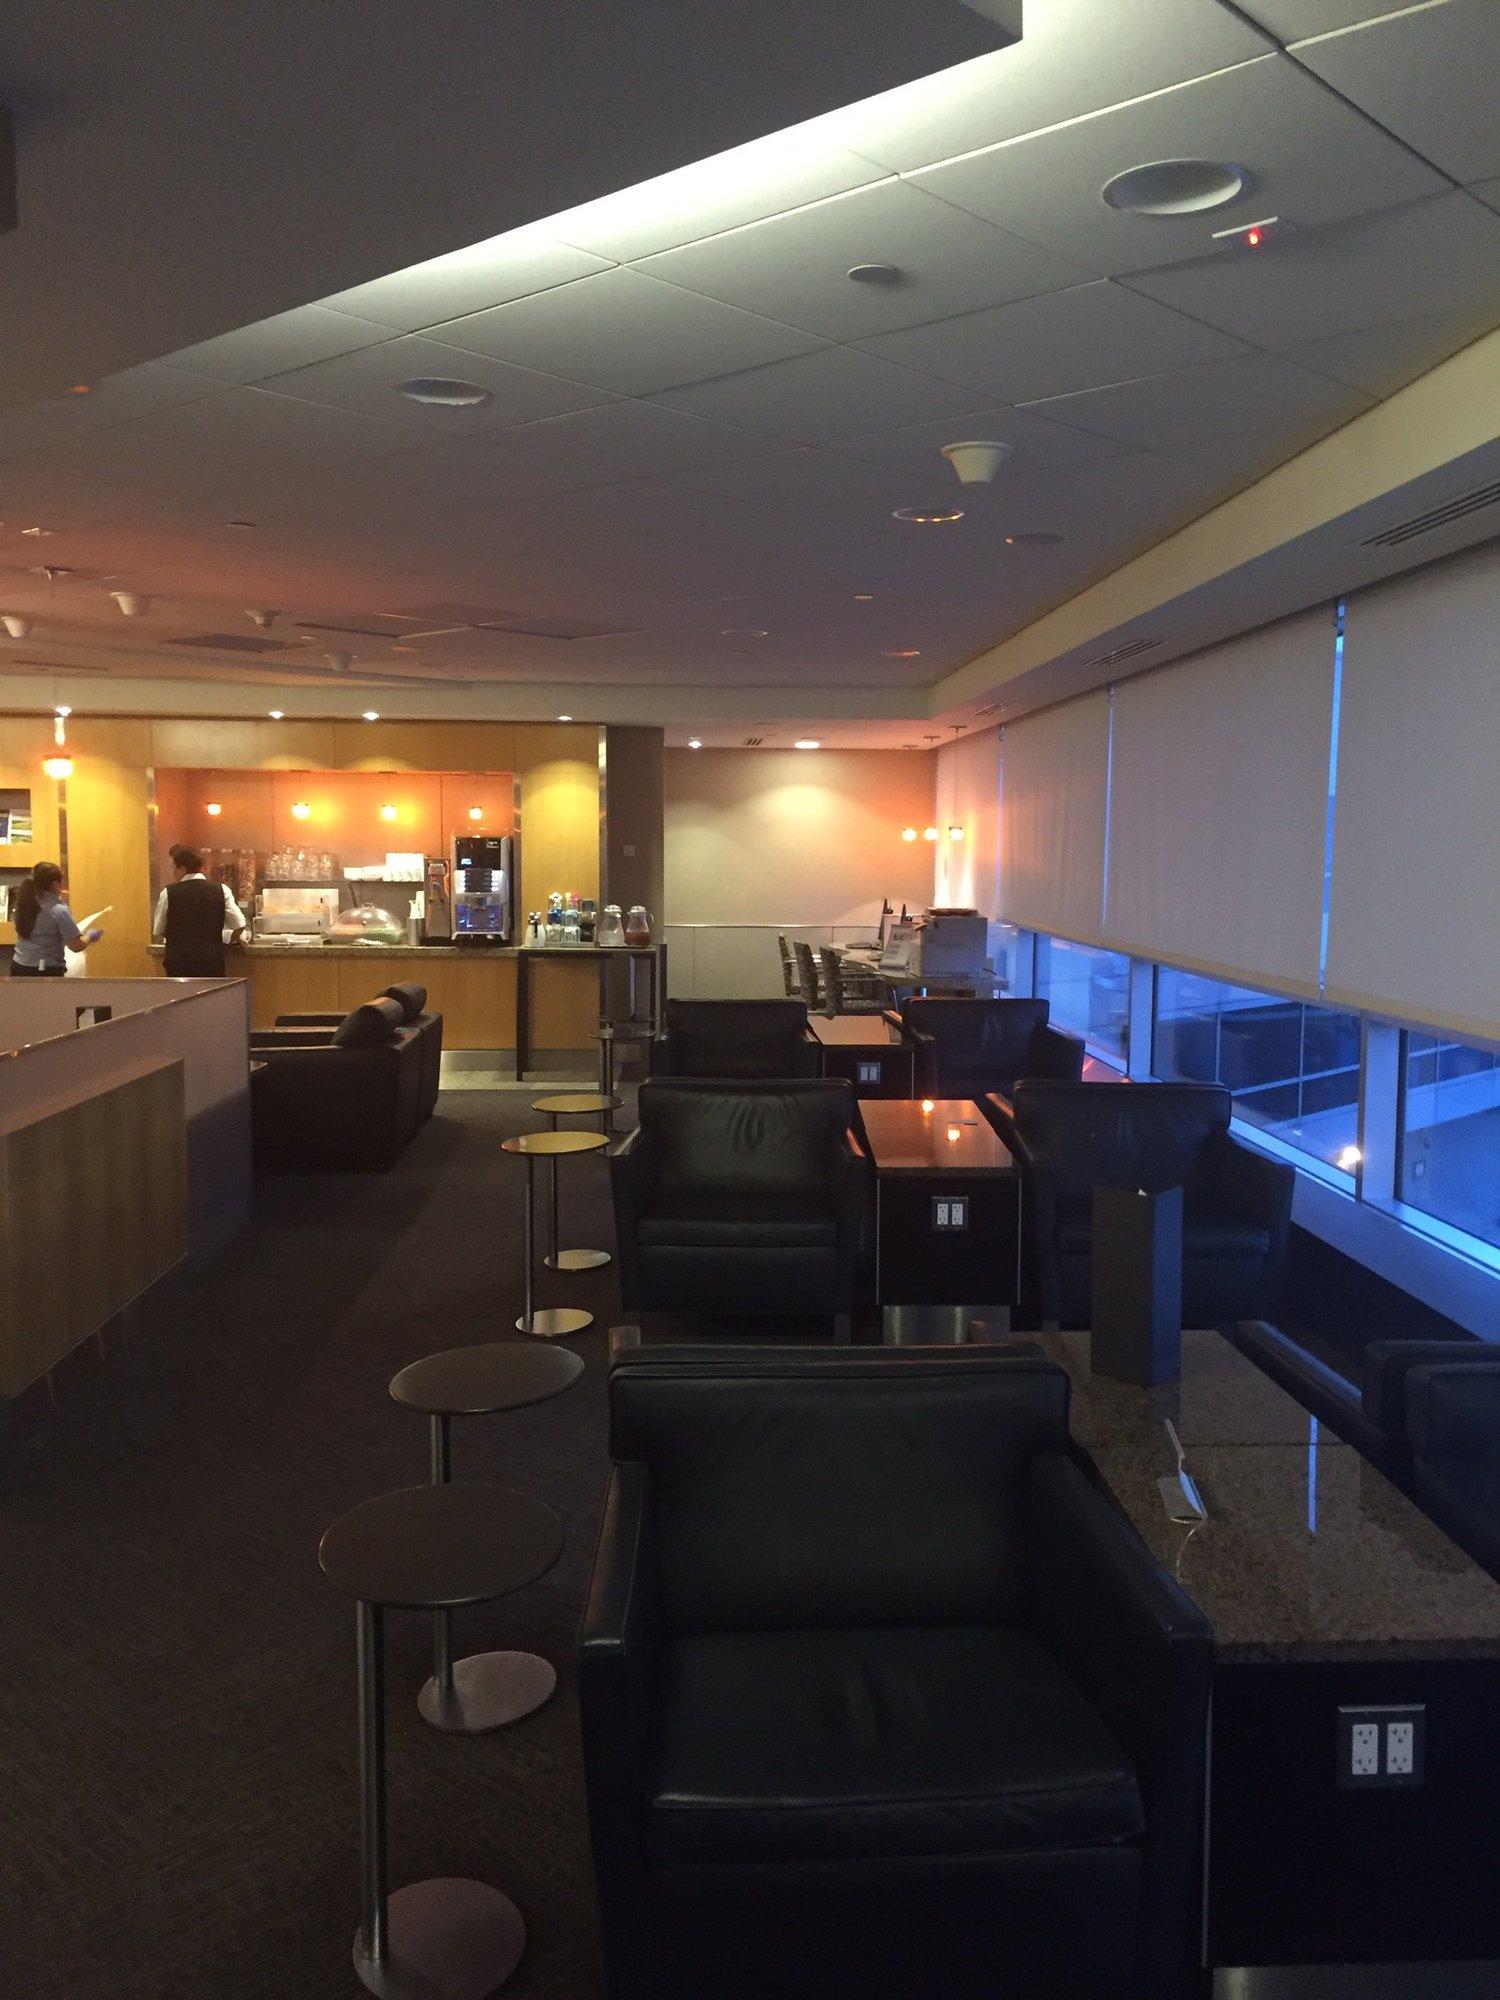 American Airlines Admirals Club image 18 of 25